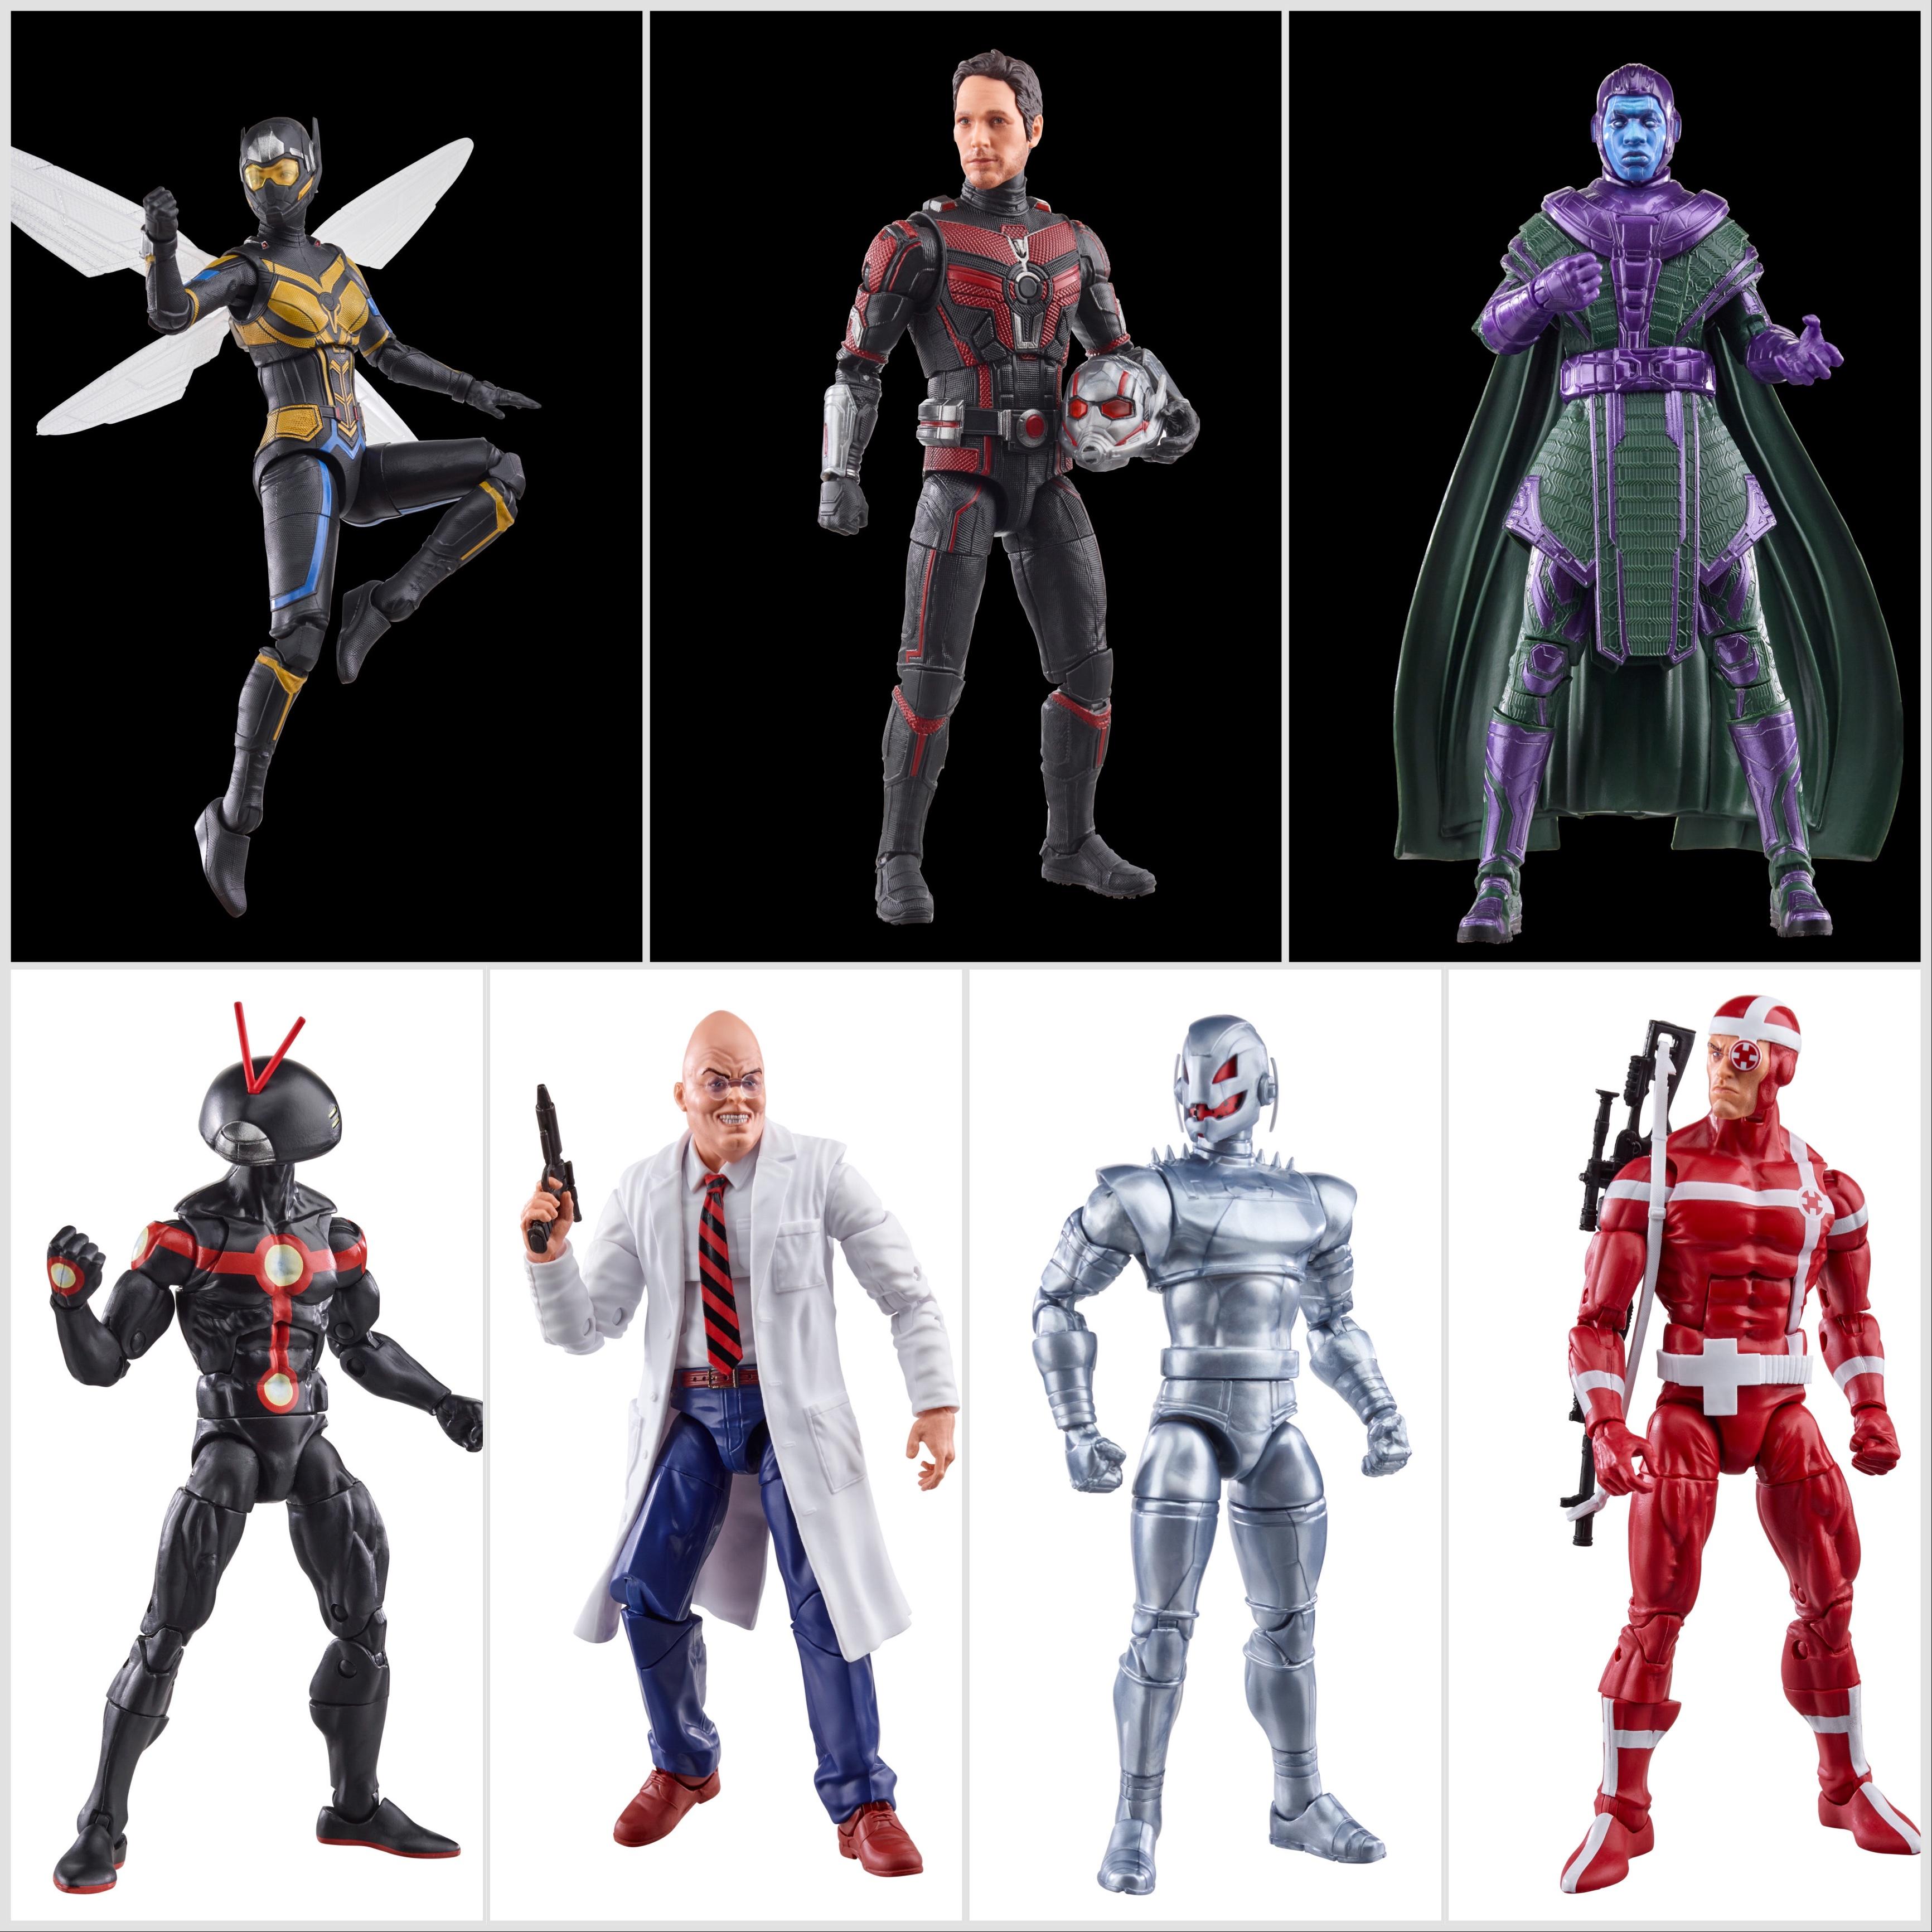 Ant-Man and the Wasp: Quantumania Marvel Legends Action Figure